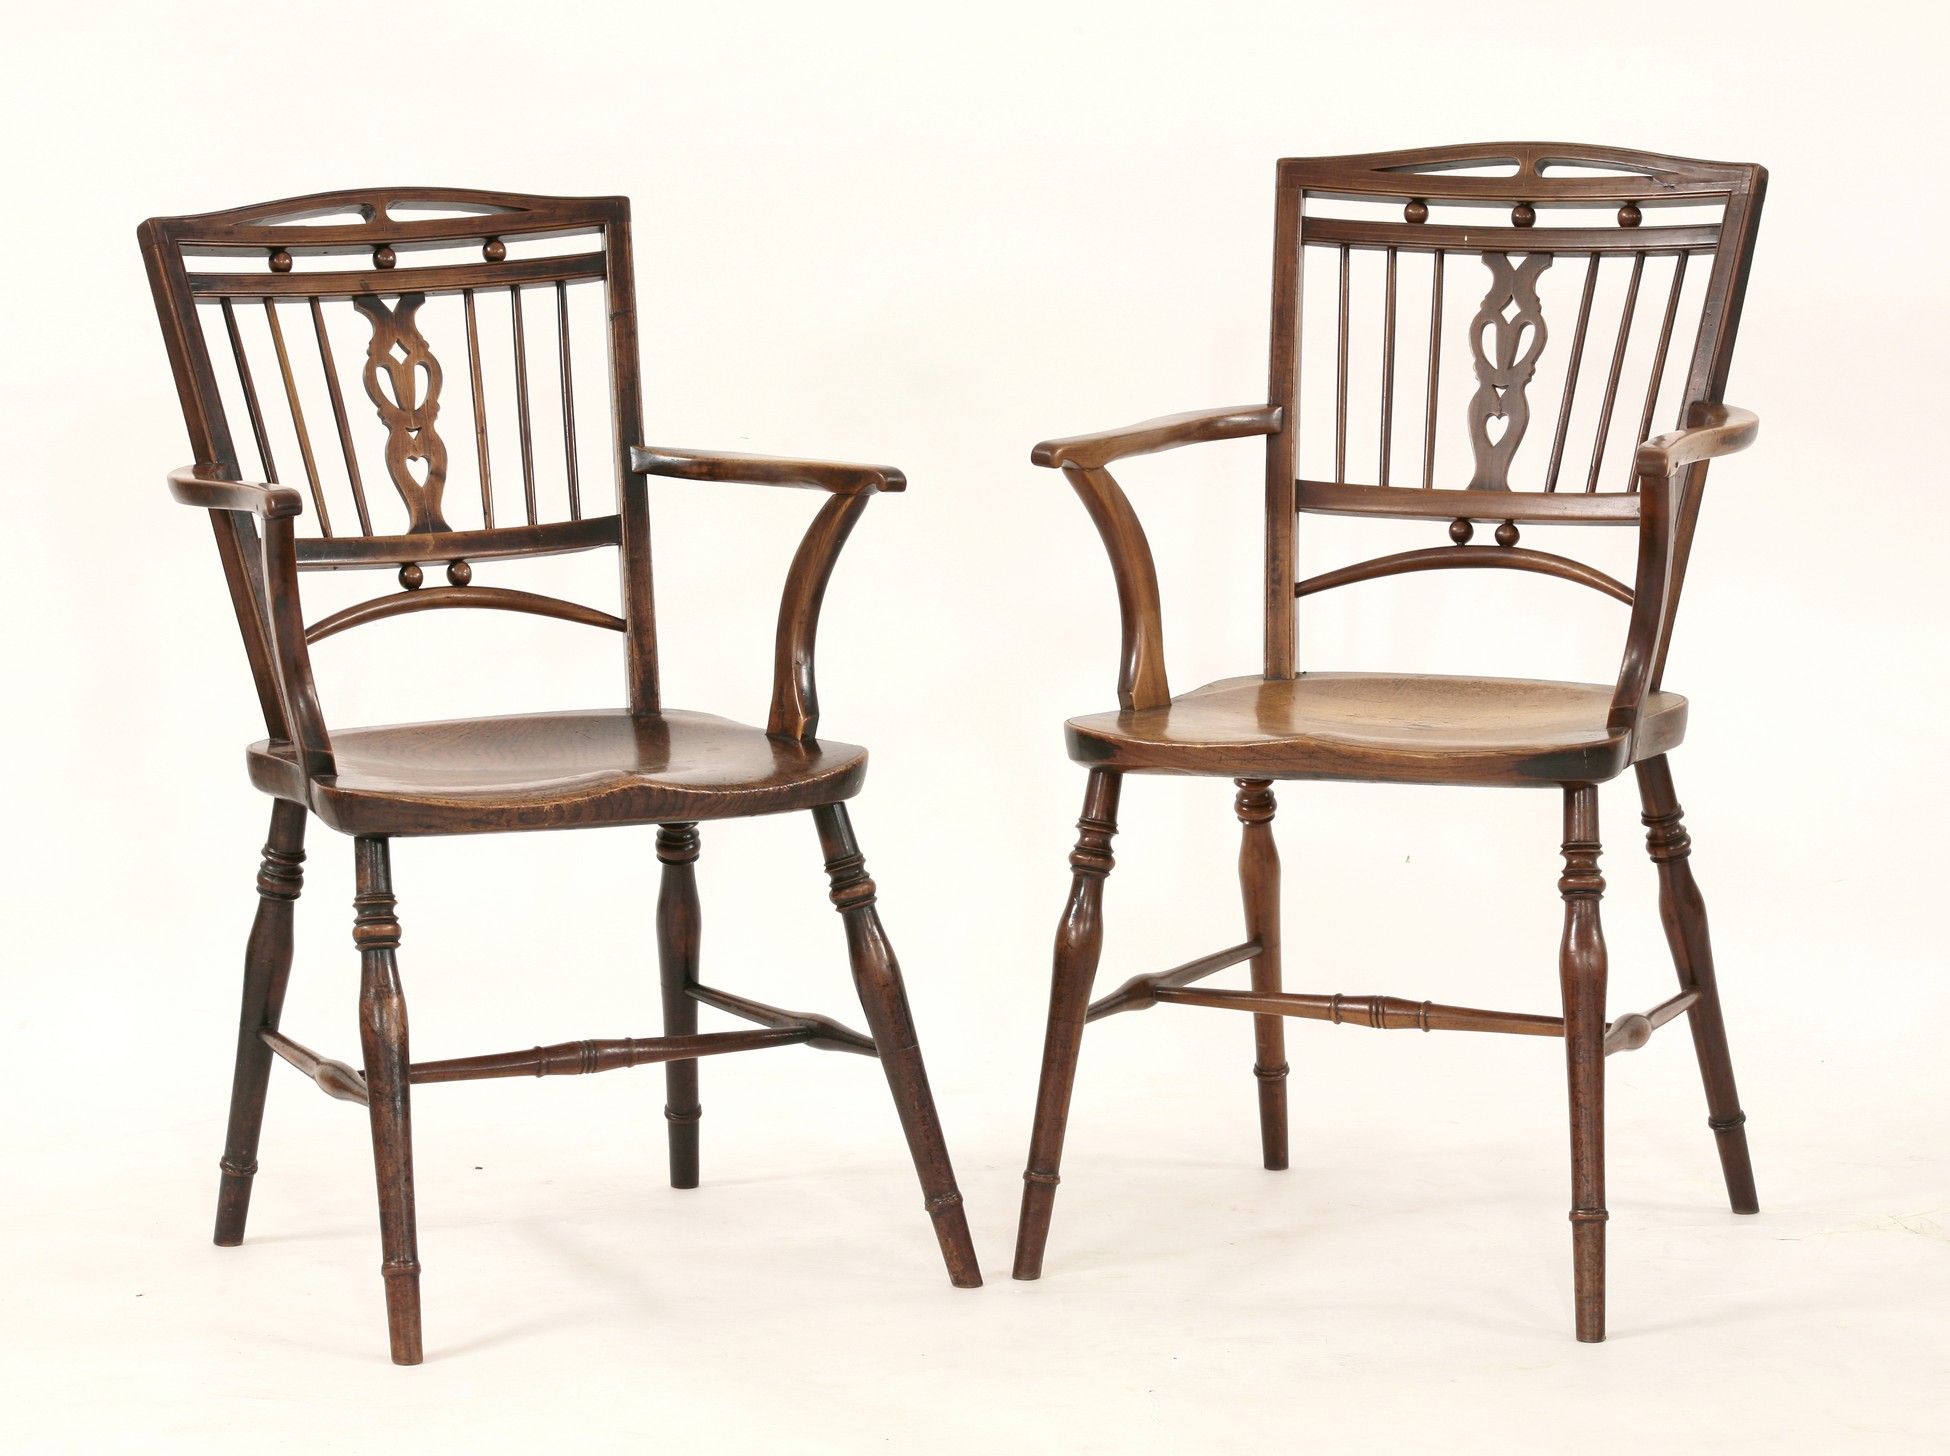 A pair of strung fruitwood Mendlesham chairs,
19th century, with heart-shaped splats and elm